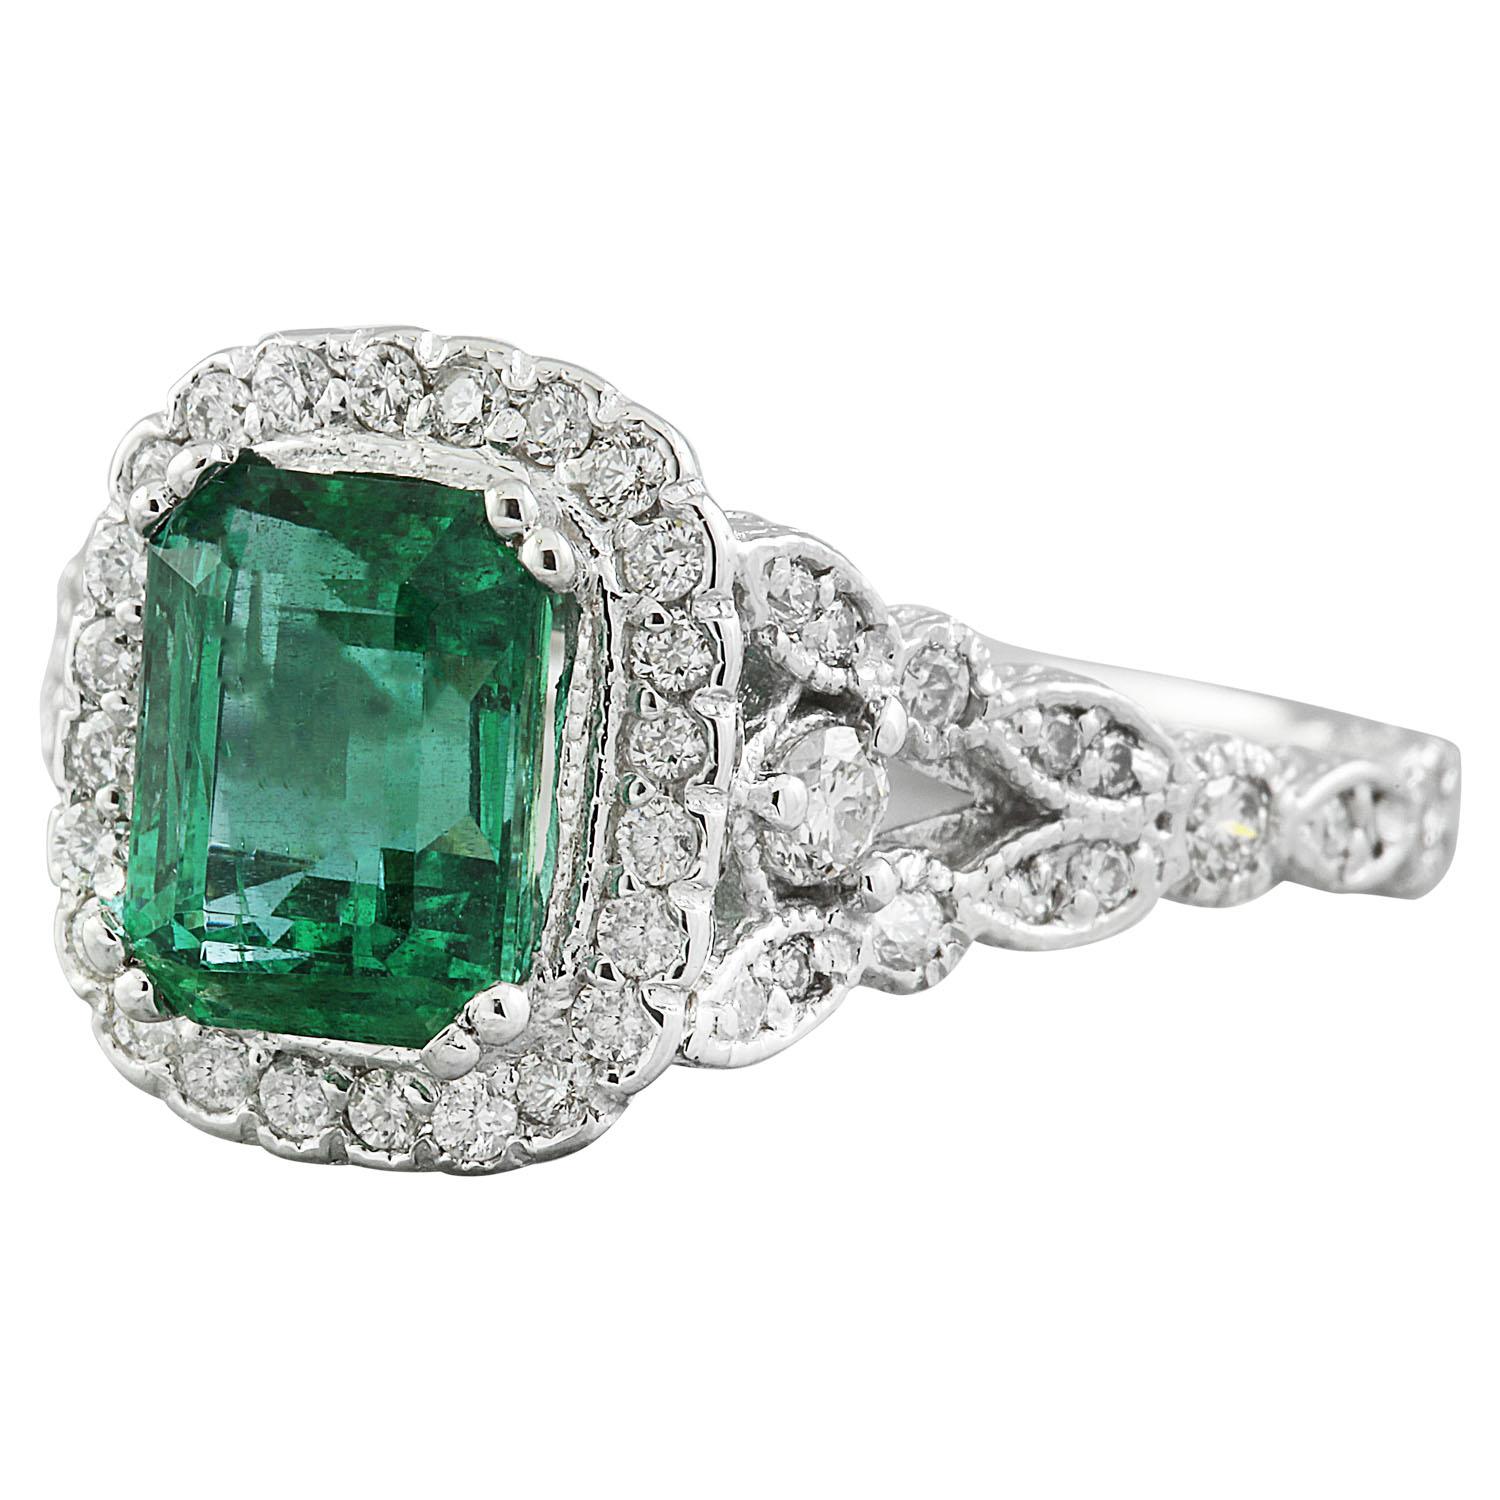 2.64 Carat Natural Emerald 14 Karat Solid White Gold Diamond Ring
Stamped: 14K 
Total Ring Weight: 5 Grams 
Emerald Weight 2.04 Carat (8.00x6.00 Millimeters)
Diamond Weight: 0.60 Carat (F-G Color, VS2-SI1 Clarity)
Face Measures: 12.15x10.45